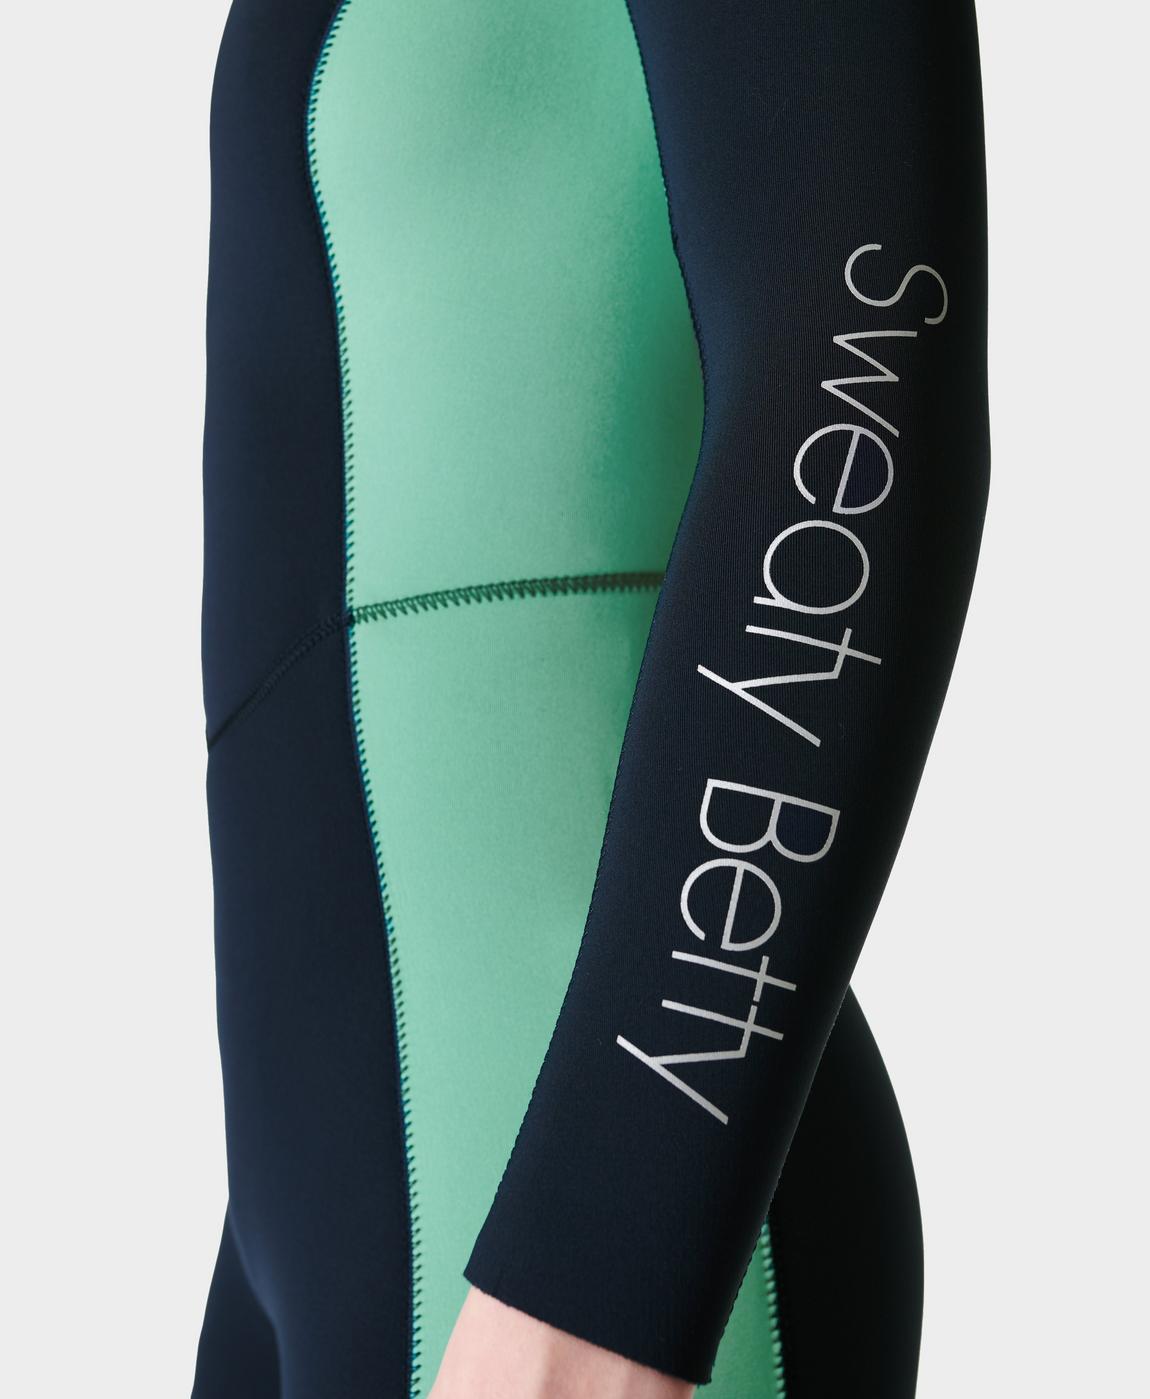 Surf Wetsuit - French Navy Blue Colour Block, Women's Swimsuits & Bikinis